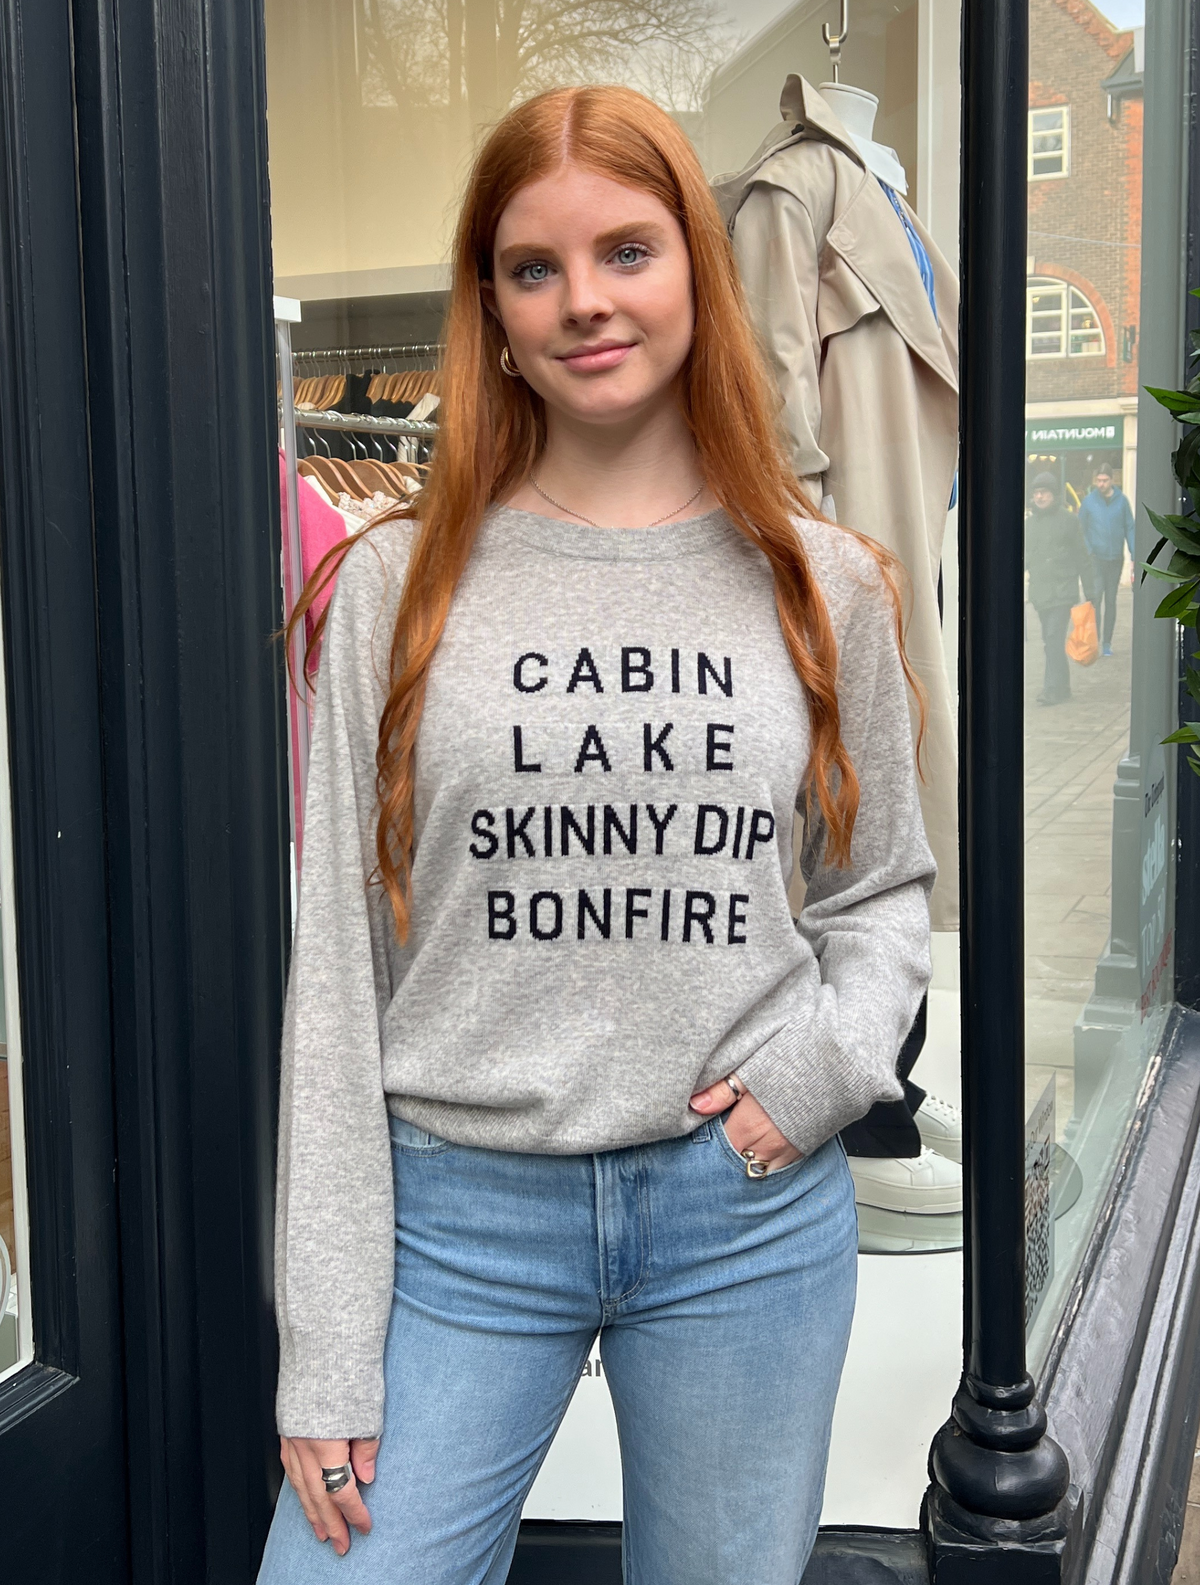 grey cashmere jumper with cabin, lake, skinny dip and bonfire writen on it 